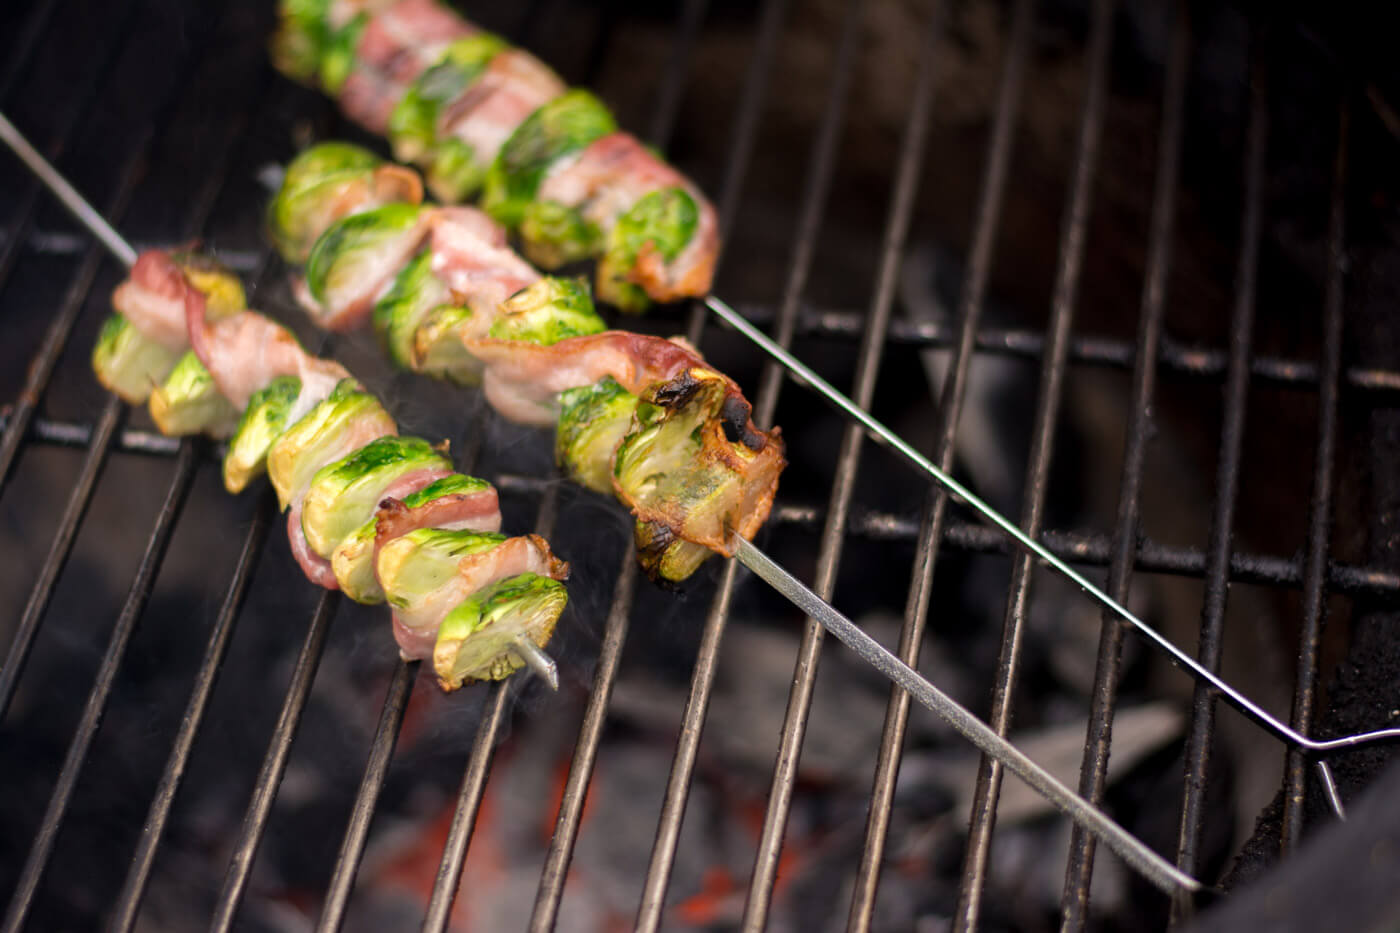 Brussel Sprout kabobs over a direct heat from the grill and turning toasty brown.